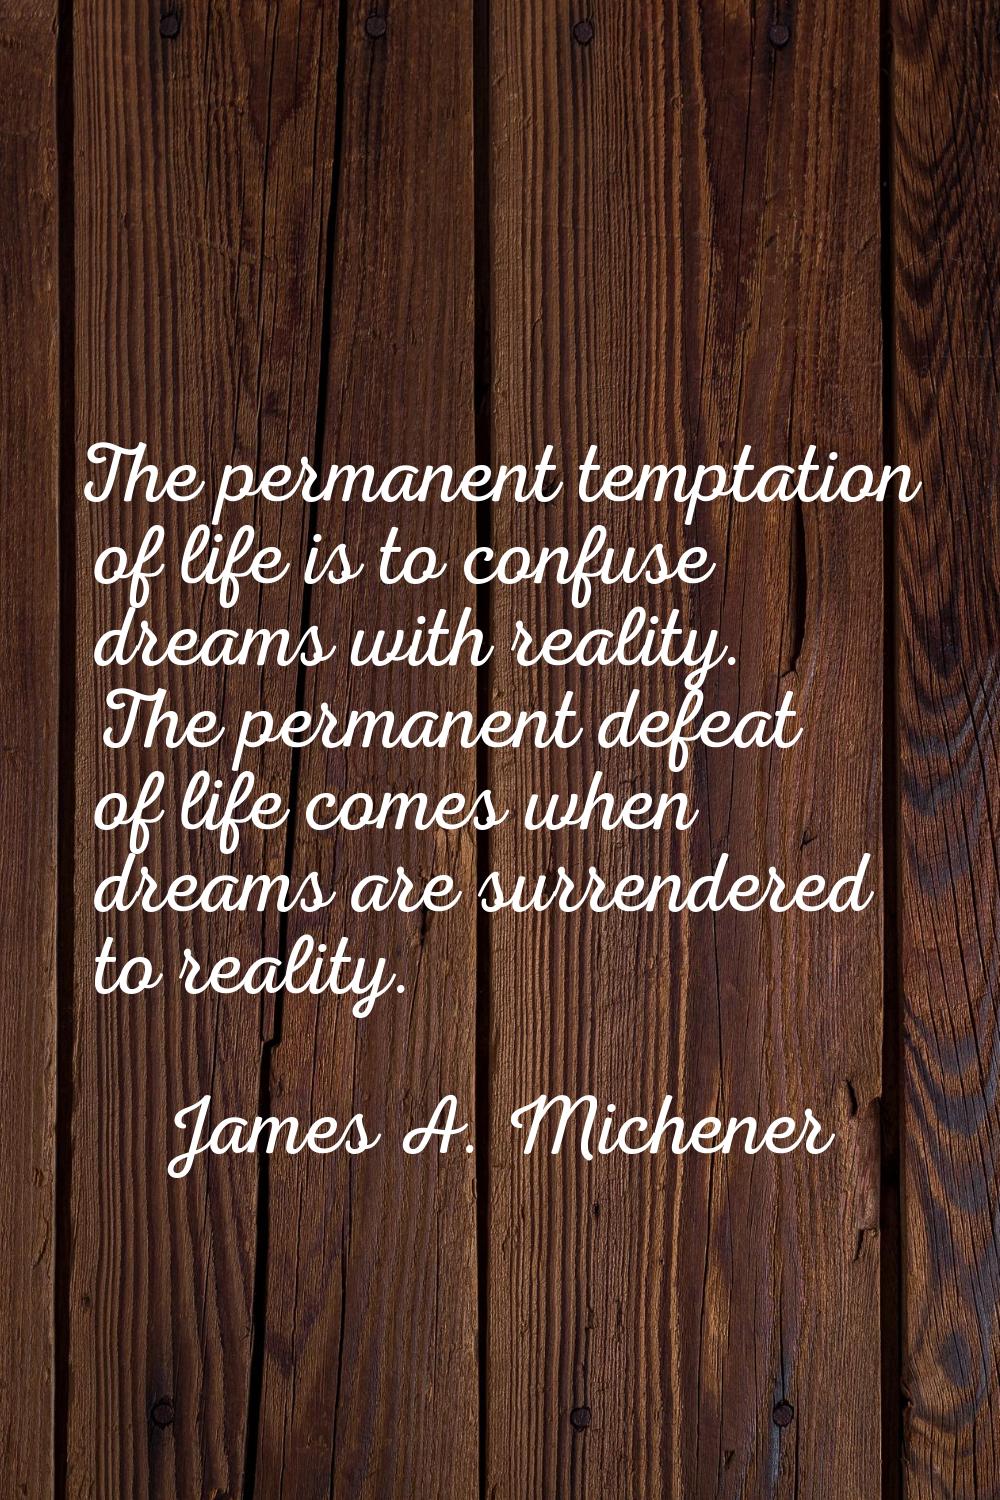 The permanent temptation of life is to confuse dreams with reality. The permanent defeat of life co